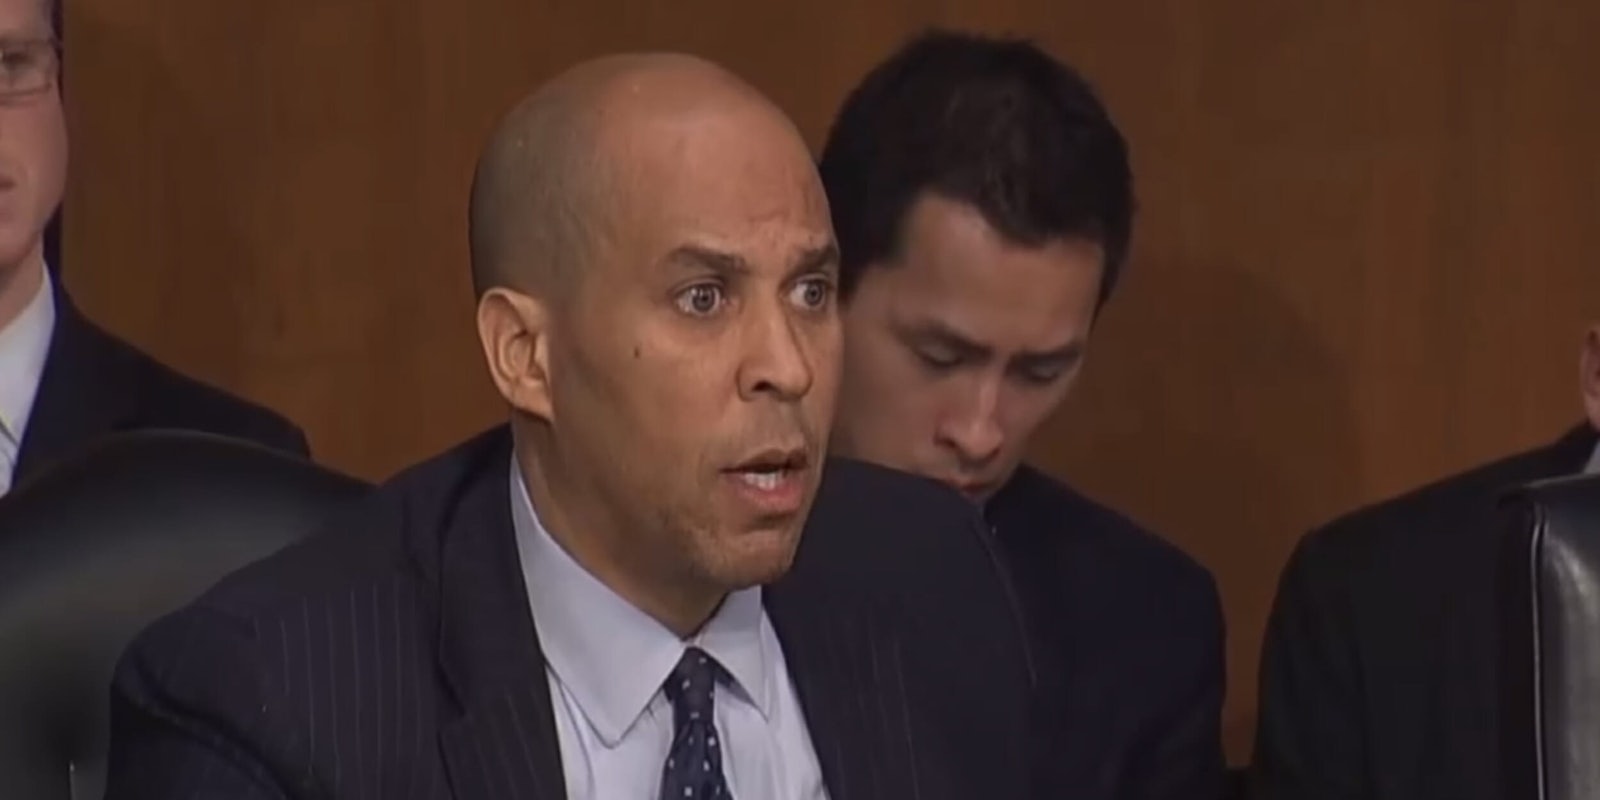 The RNC says Cory Booker was 'mansplaining' when he criticized DHS Secretary Kirstjen Nielsen over her comments about President Donald Trump‘s reported 'shithole' remarks.